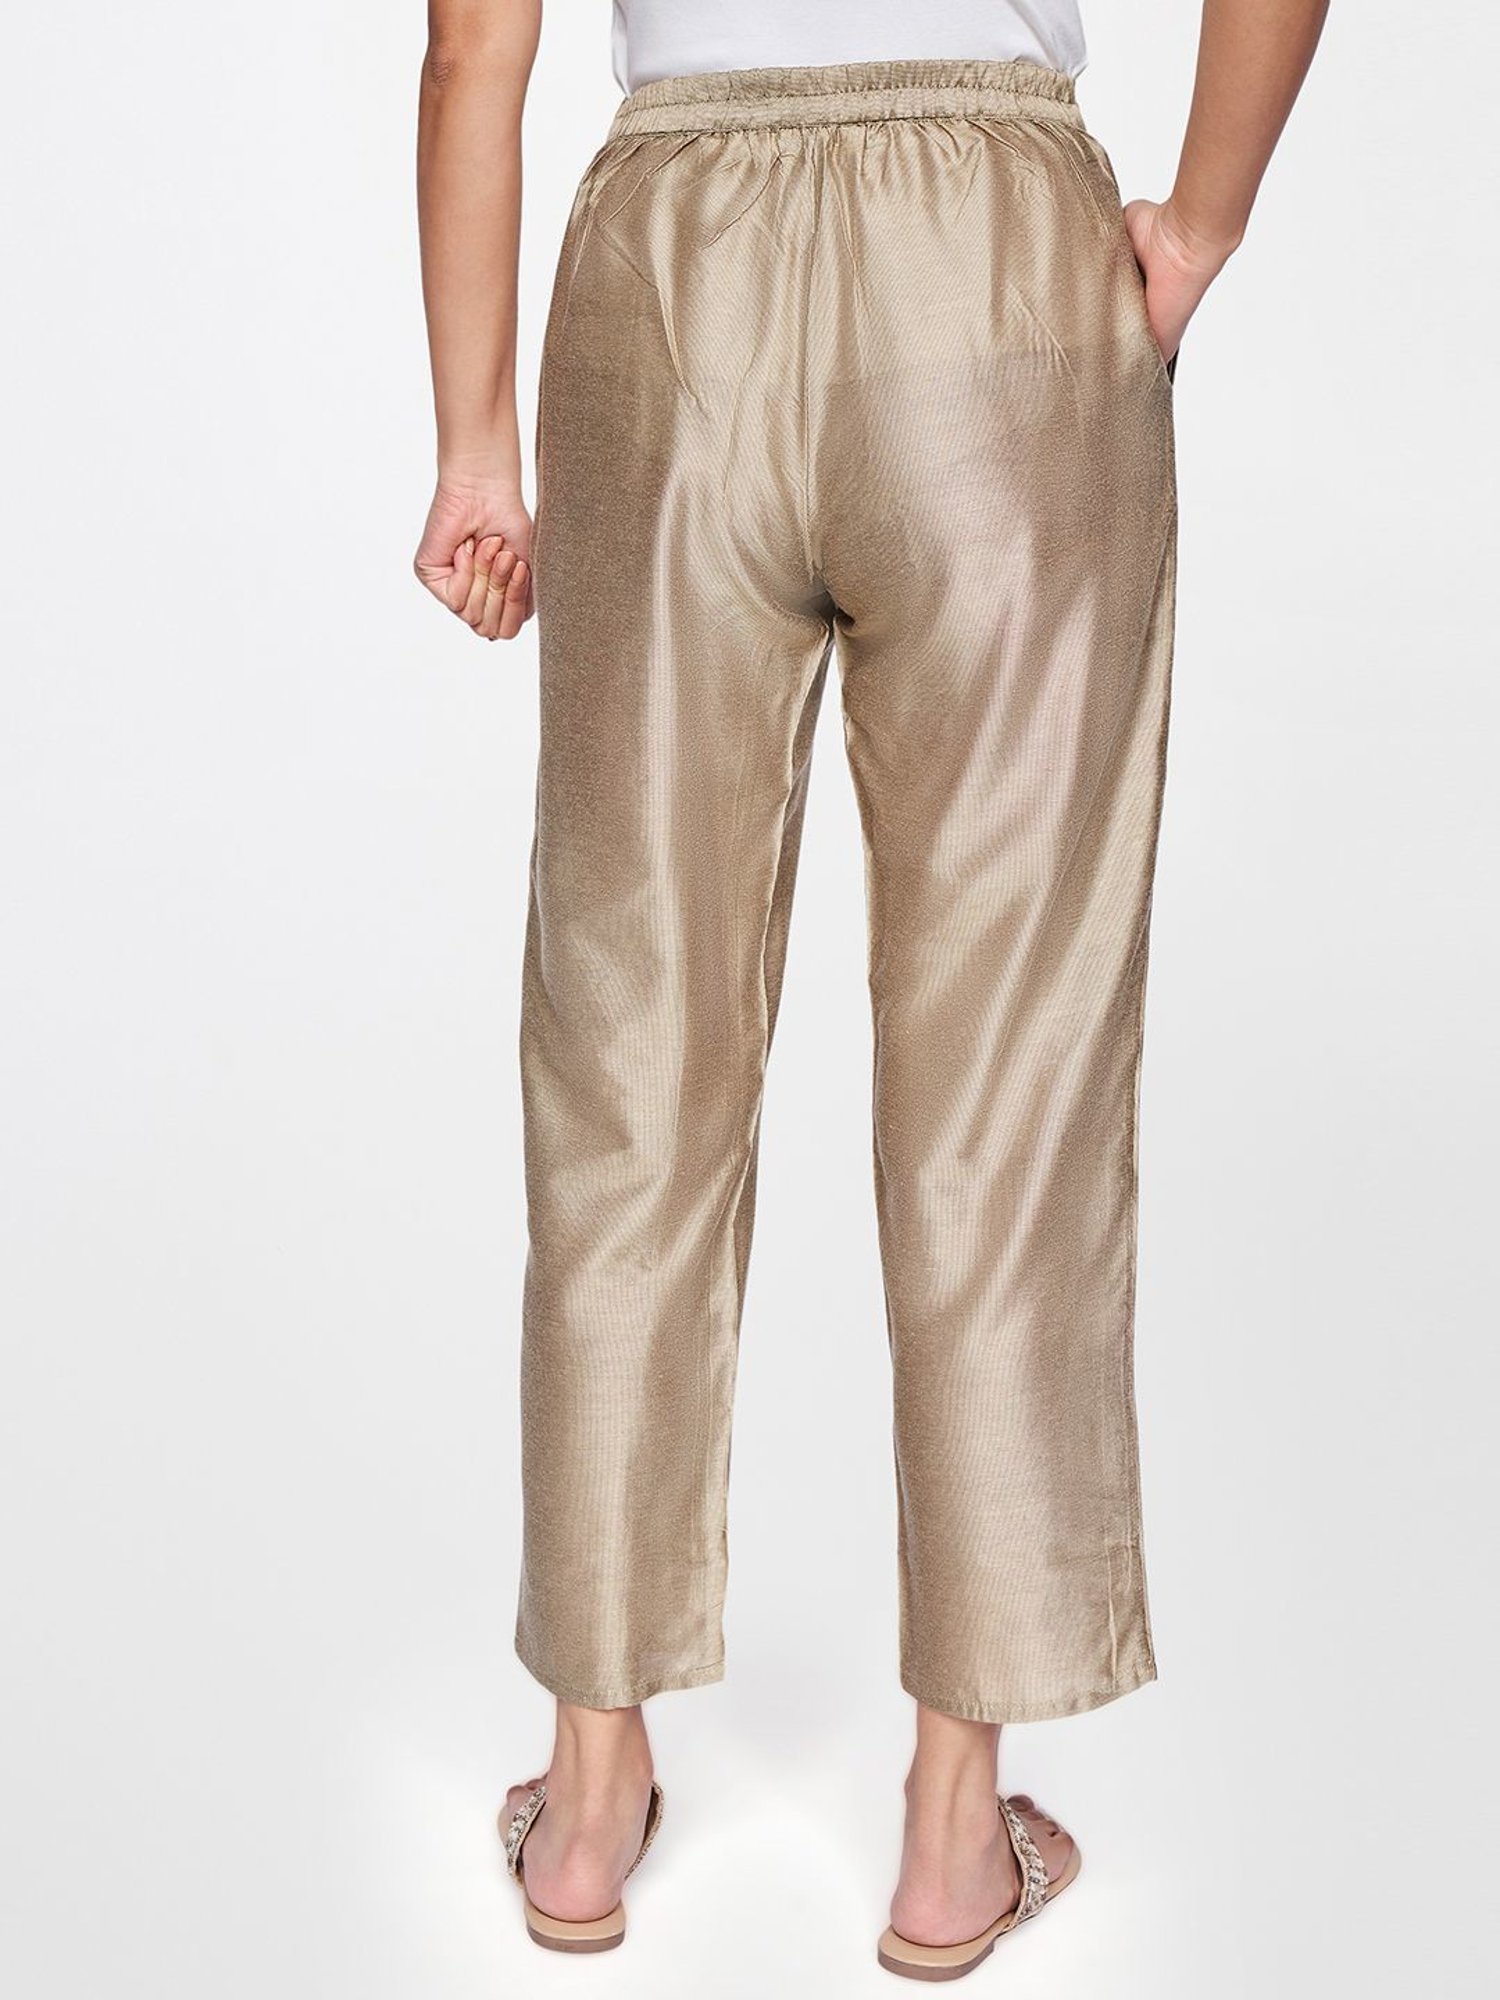 Source Women Party Golden Pants with Waist Bandwidth Loose Pants Lady Club Metallic  Trousers on malibabacom